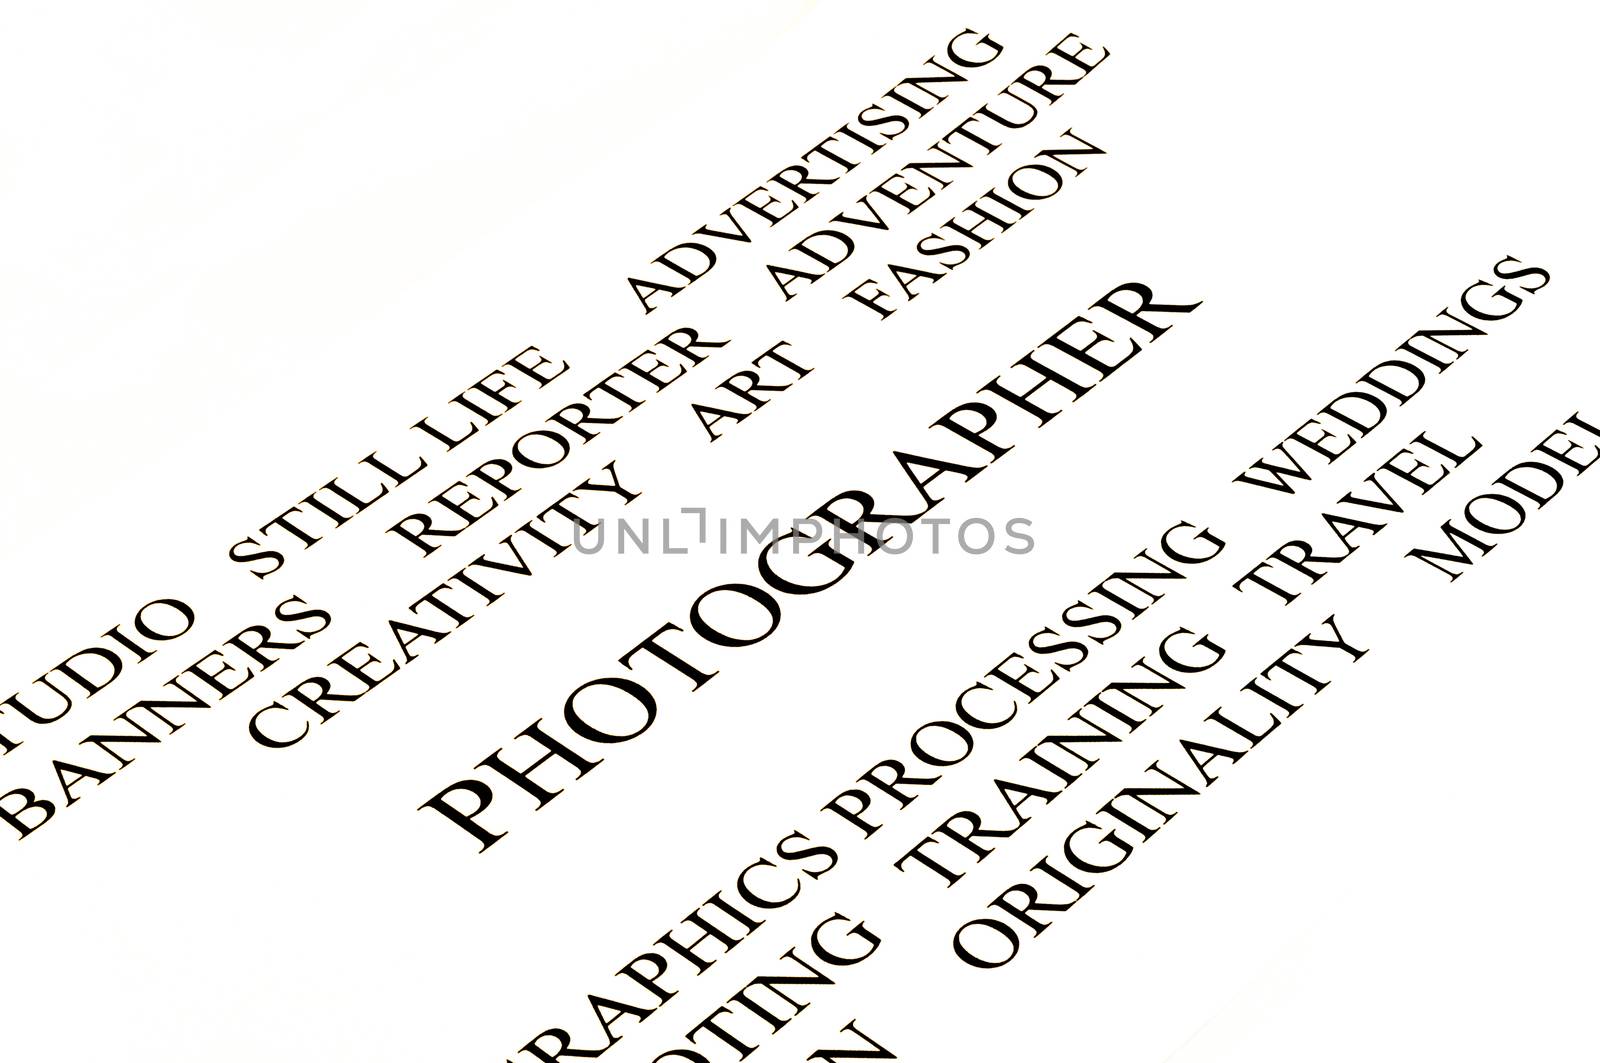 photographer banner by fcarniani